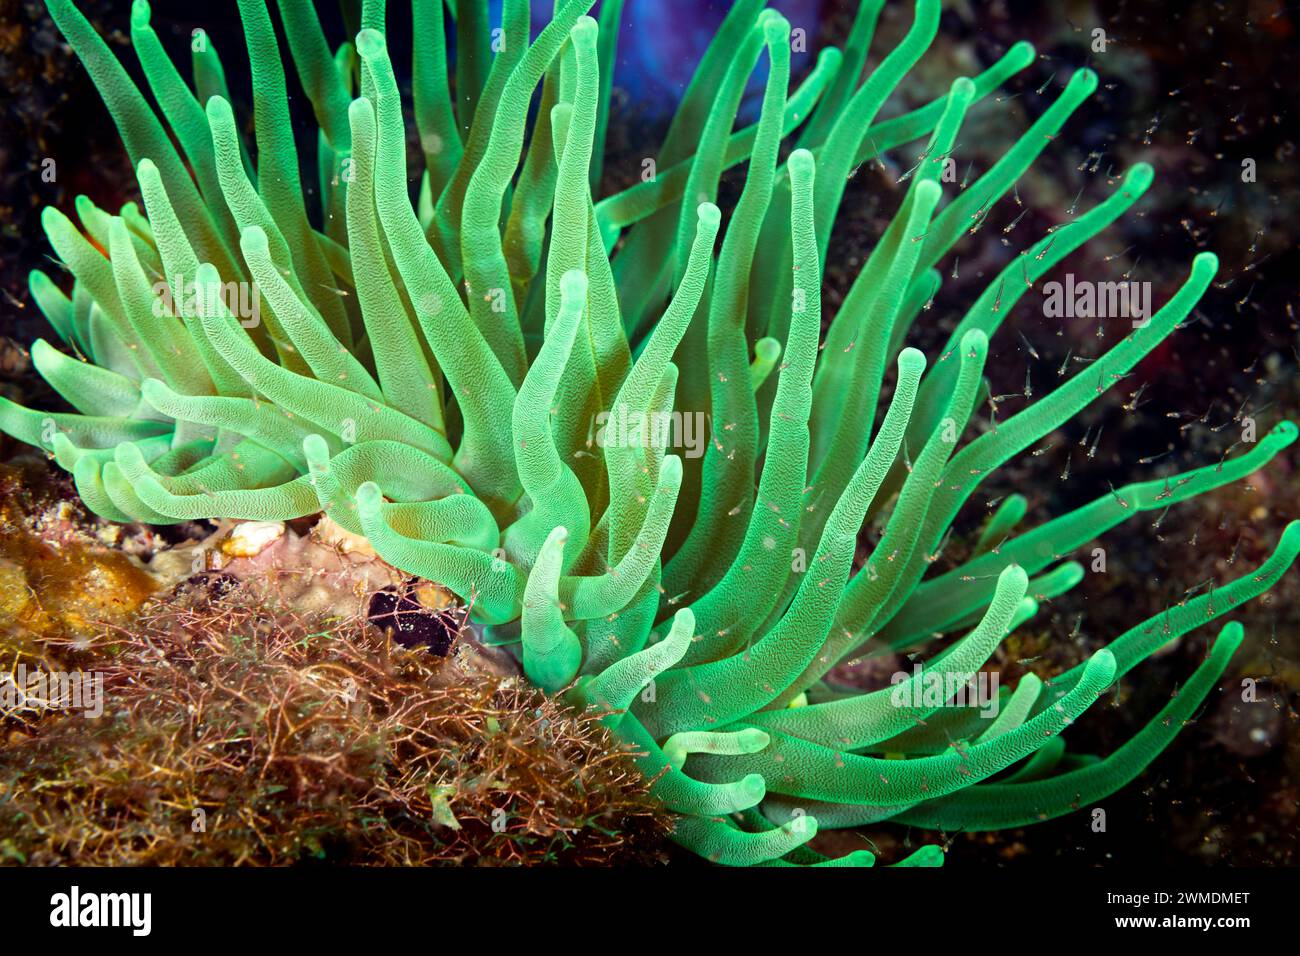 Beautiful and colorful green Sea Anemone, actiniaria, with long tentacles on coral reef Stock Photo